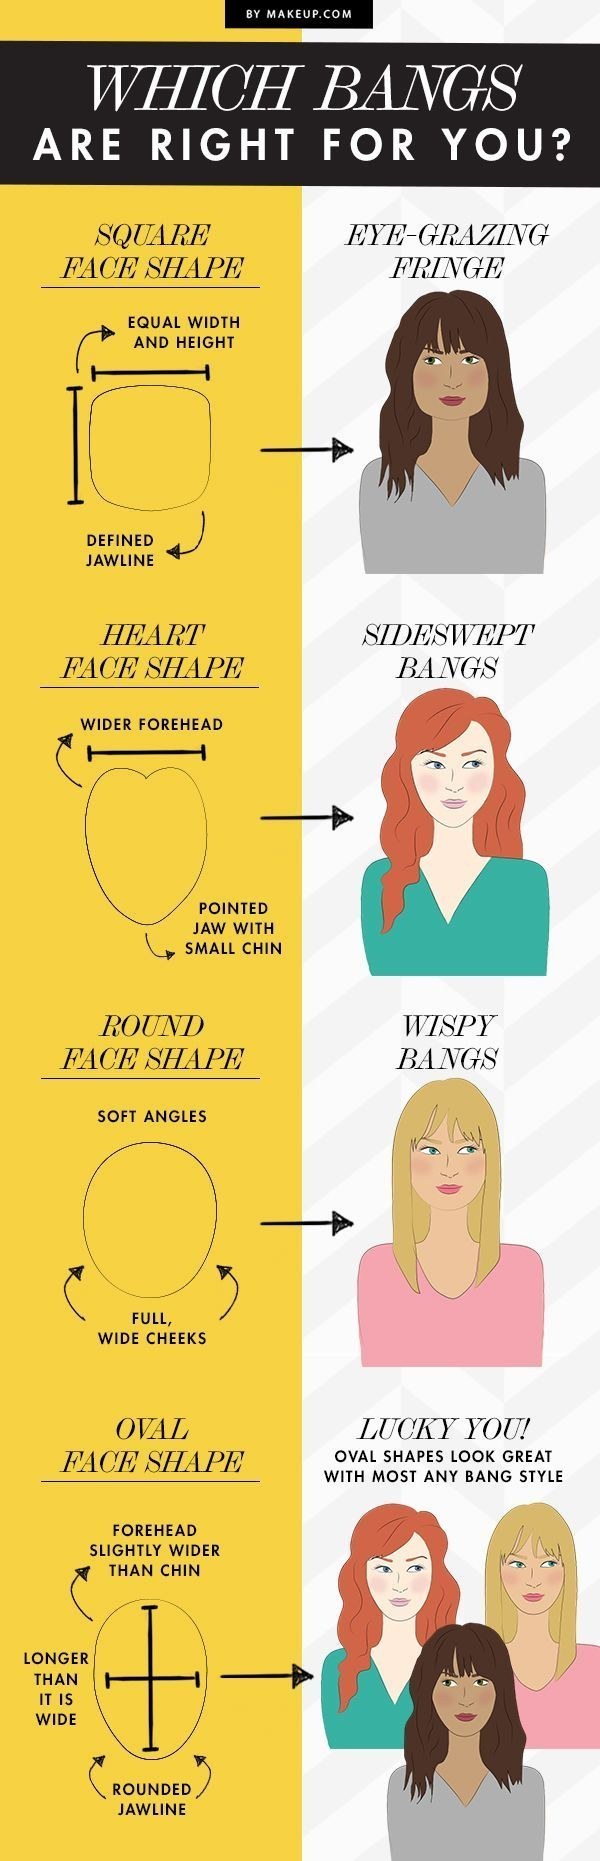 bangs for heart shaped face 2018 - By Makeup.Com Which Bangs Are Right For You? Square Face Shape EyeGrazing Fringe Equal Width And Height Defined Jawline Heart Face Shape Sideswept Bangs Wider Forehead Pointed Jaw With Small Chin Round Face Shape Wispy B